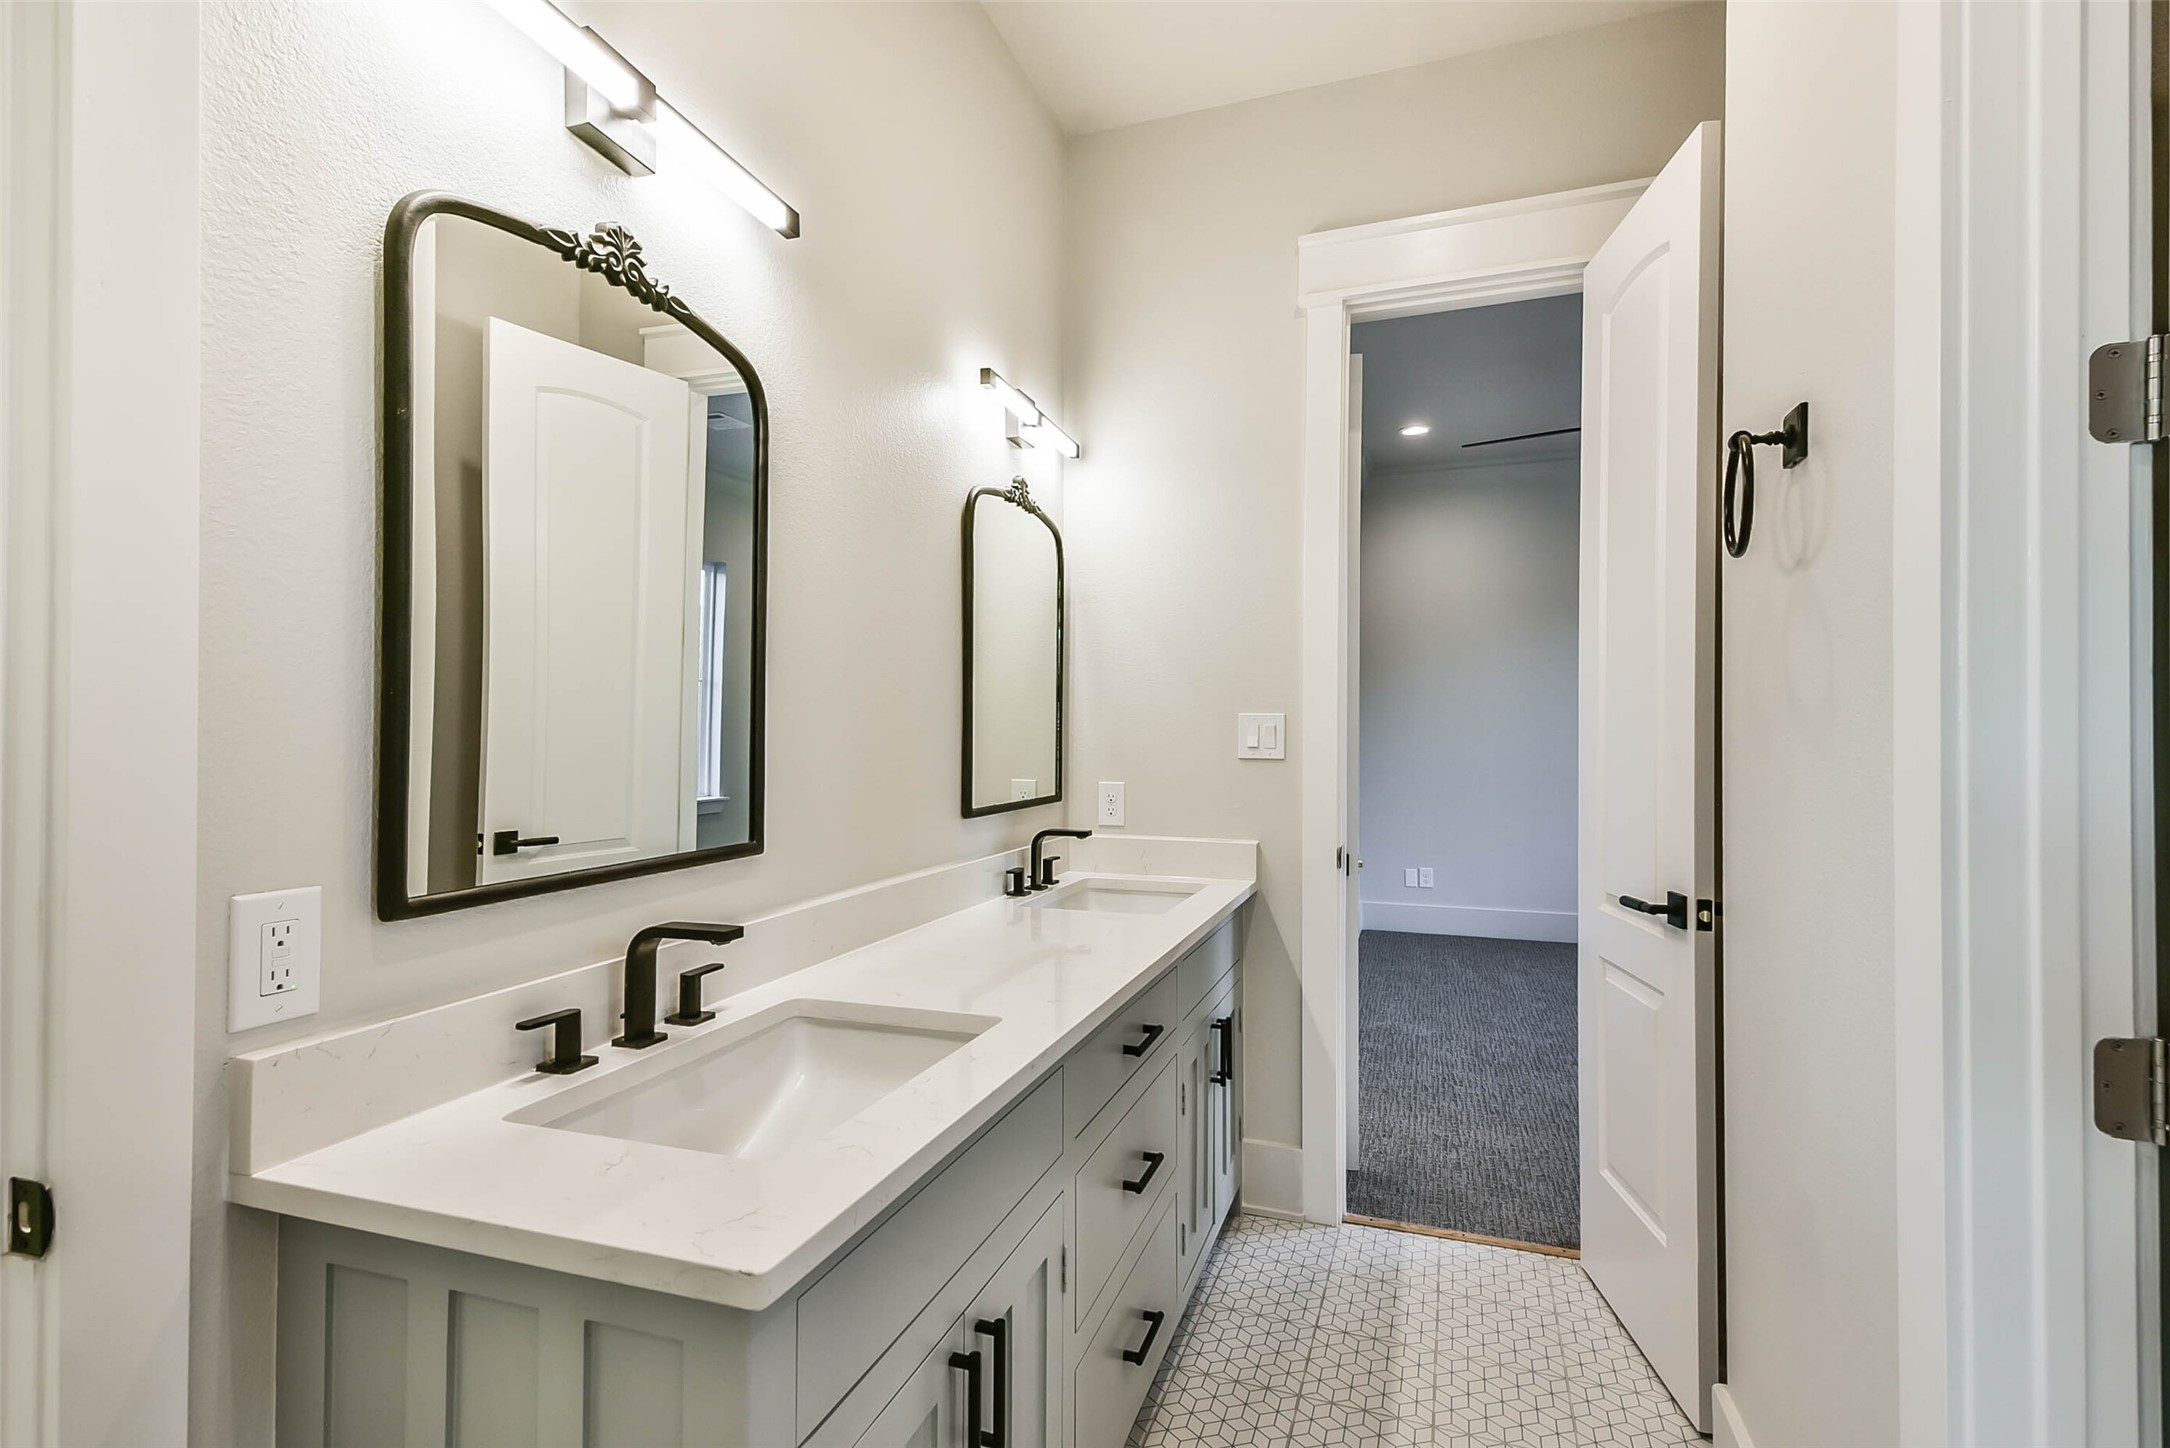 Secondary bath with double sinks hung mirrors and decorative tile floor connect bedrooms two and three.